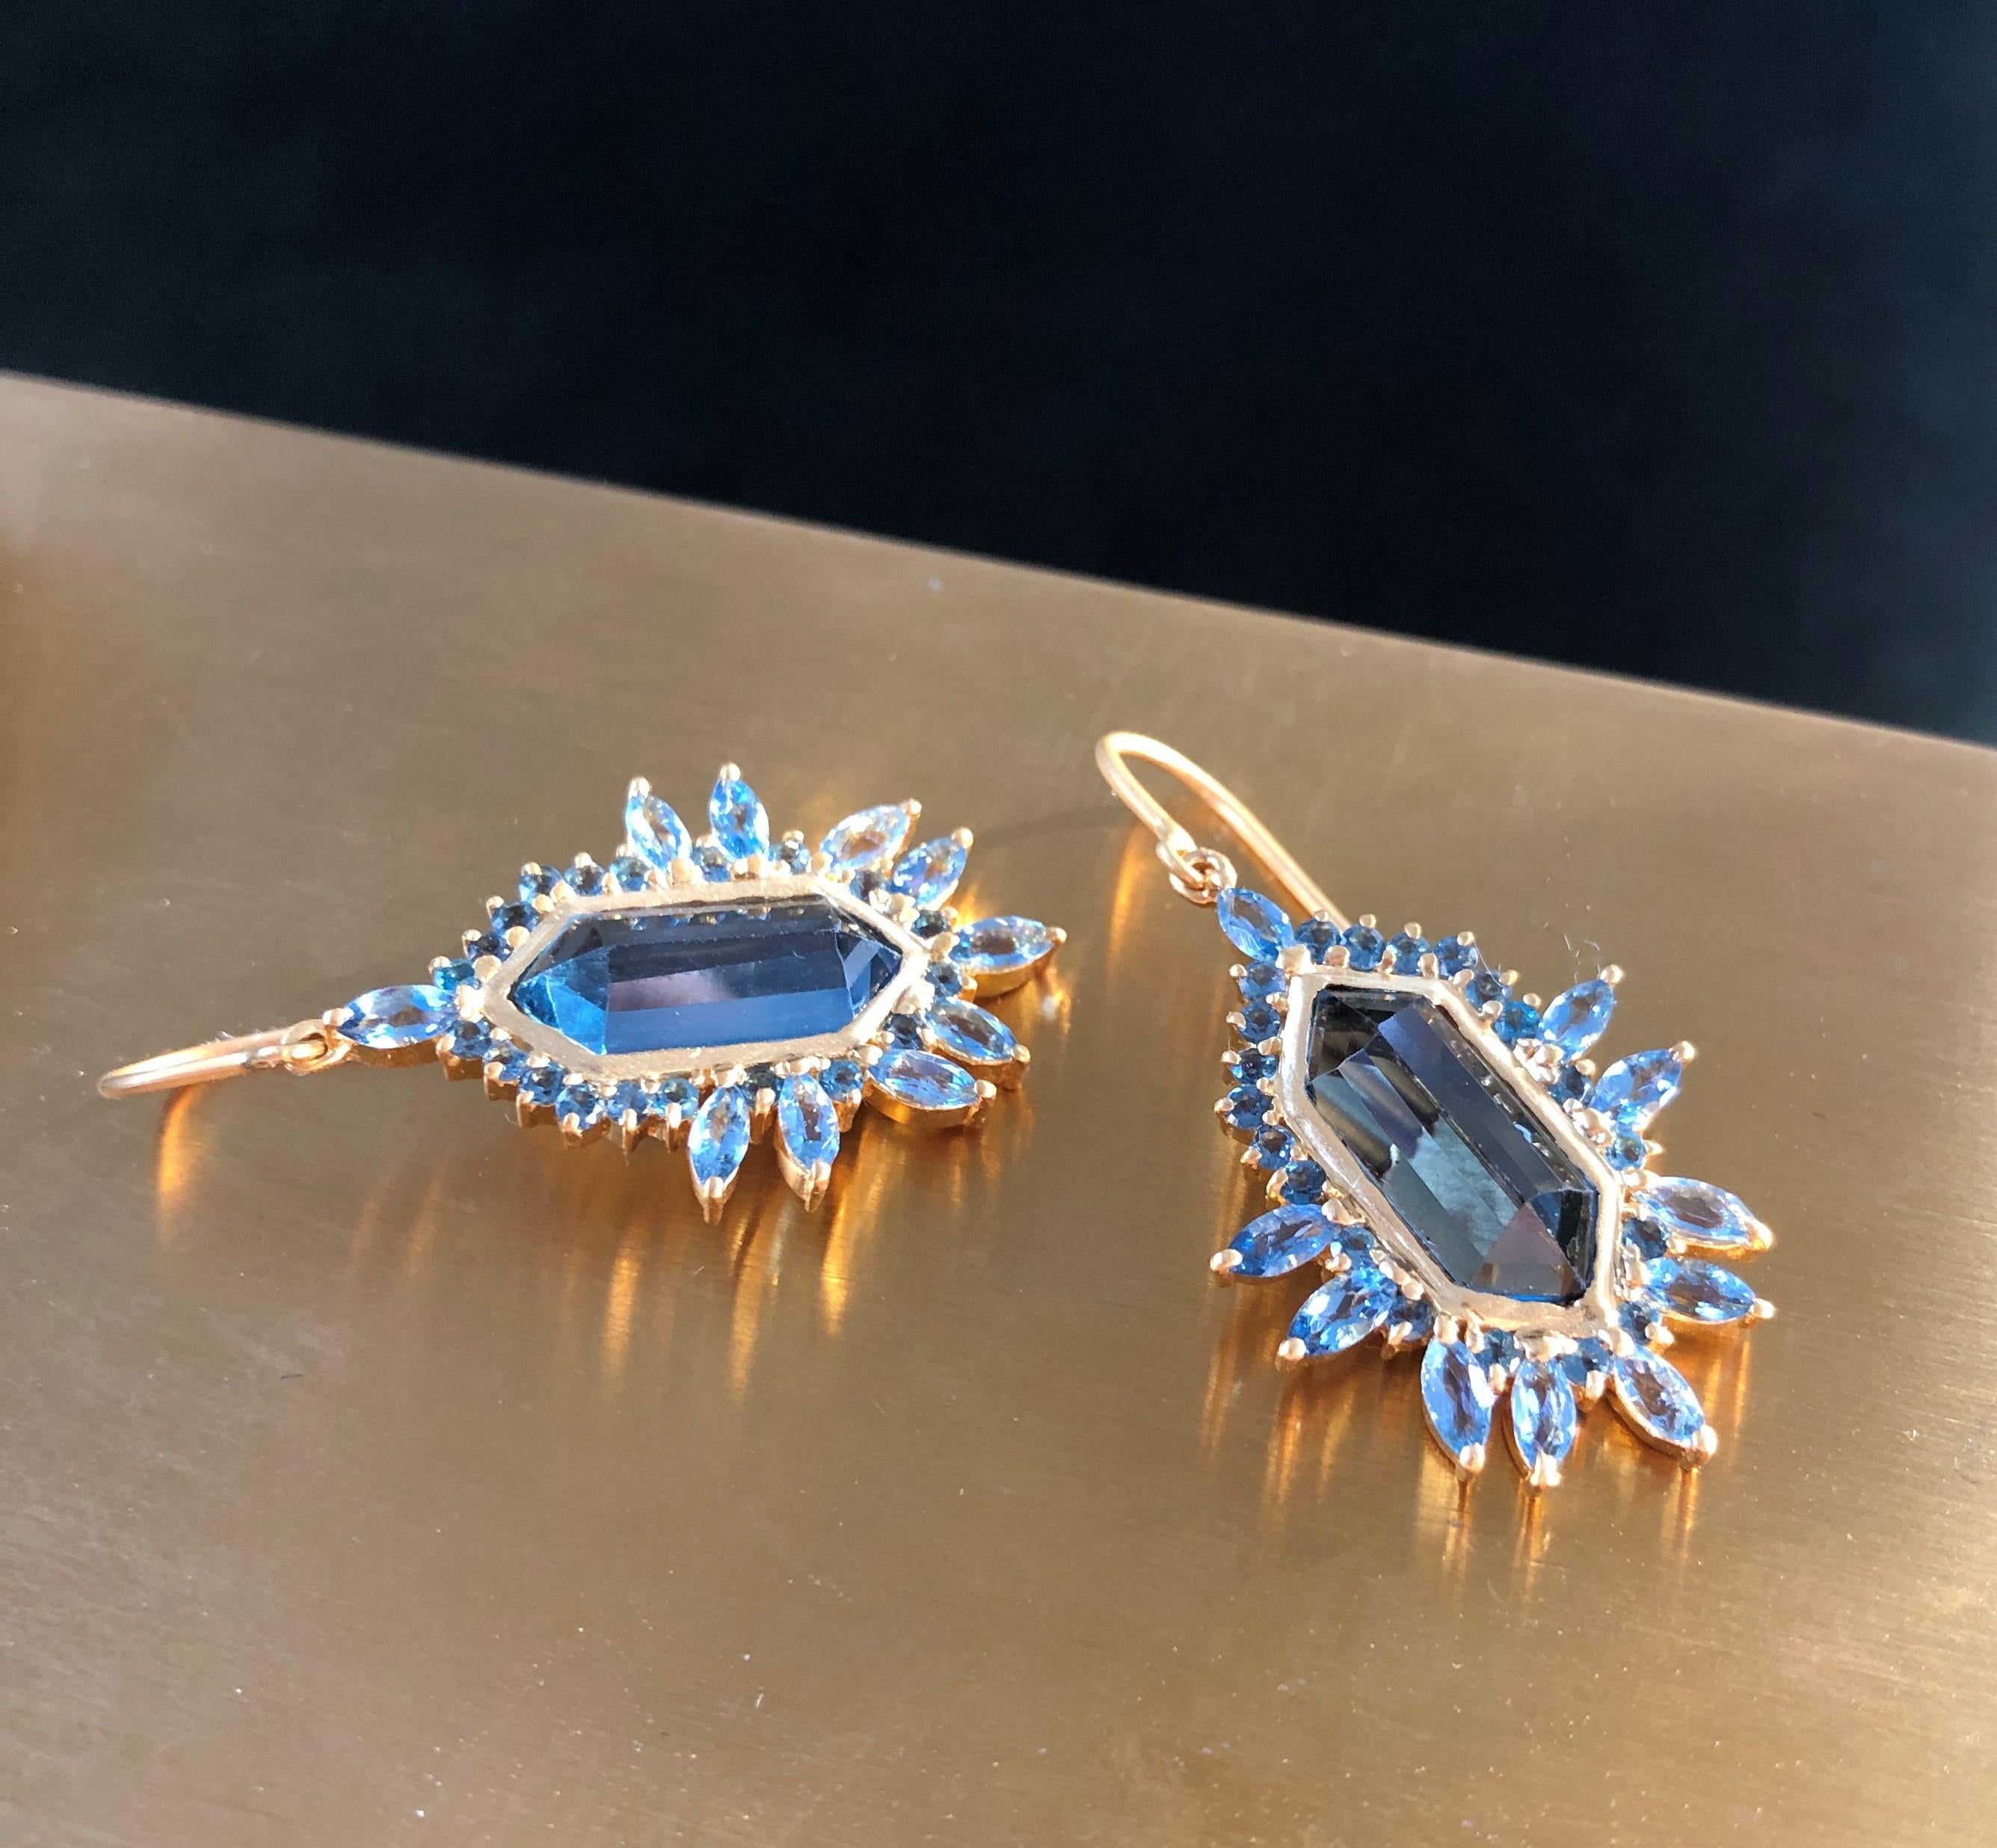 Designed by Lauren Harper, these faceted London Blue Topaz and Aquamarine 18kt Gold earrings are hand made with beautiful, vibrant and high quality stones. Solid 18kt matte Gold. Perfect finishing touch to every outfit, and lightweight enough for